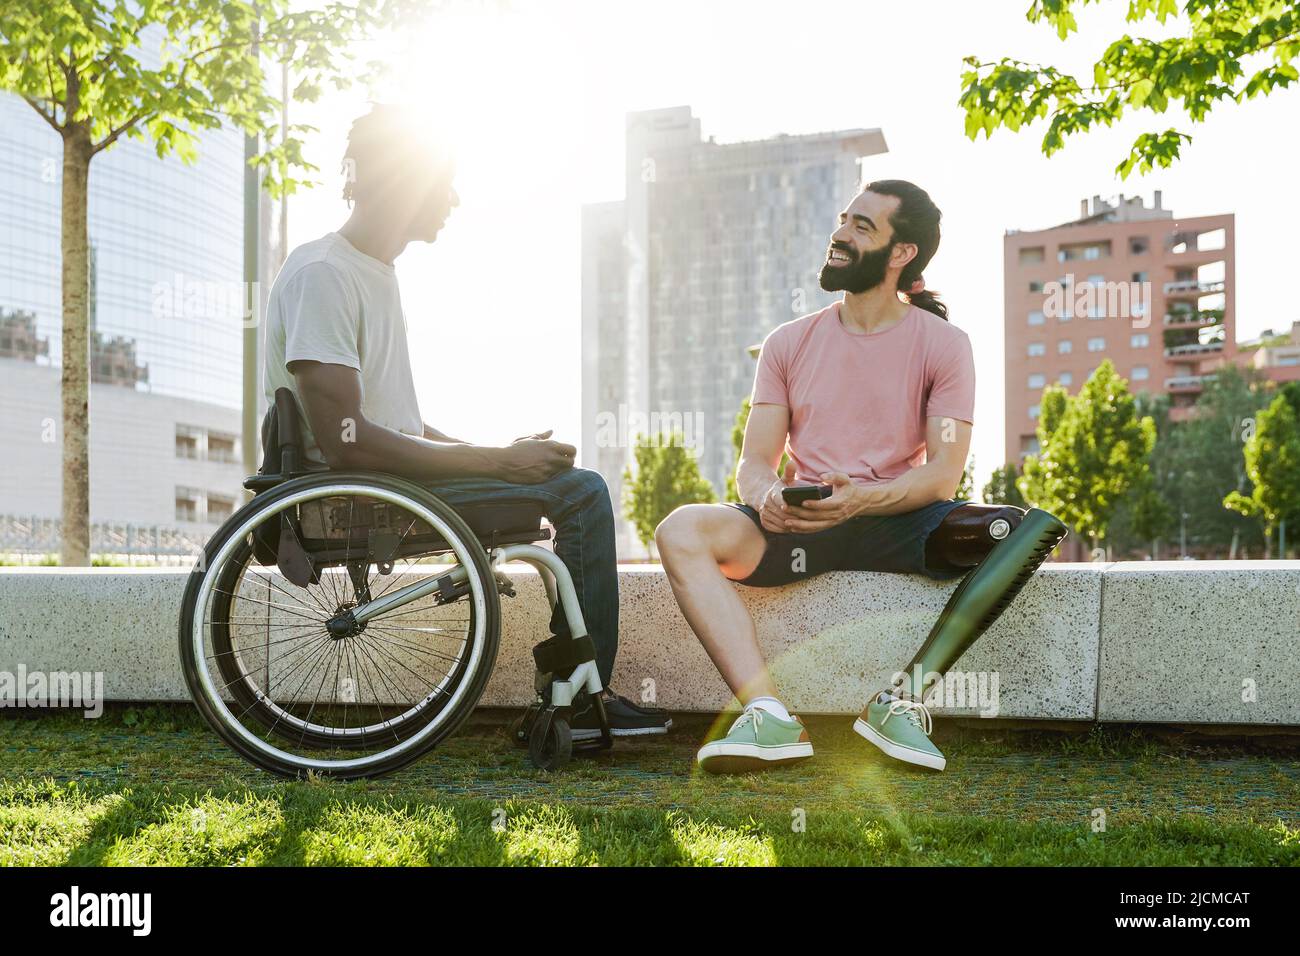 Multiethnic friends with disability having fun talking outdoor - Focus on right man with leg prosthesis Stock Photo